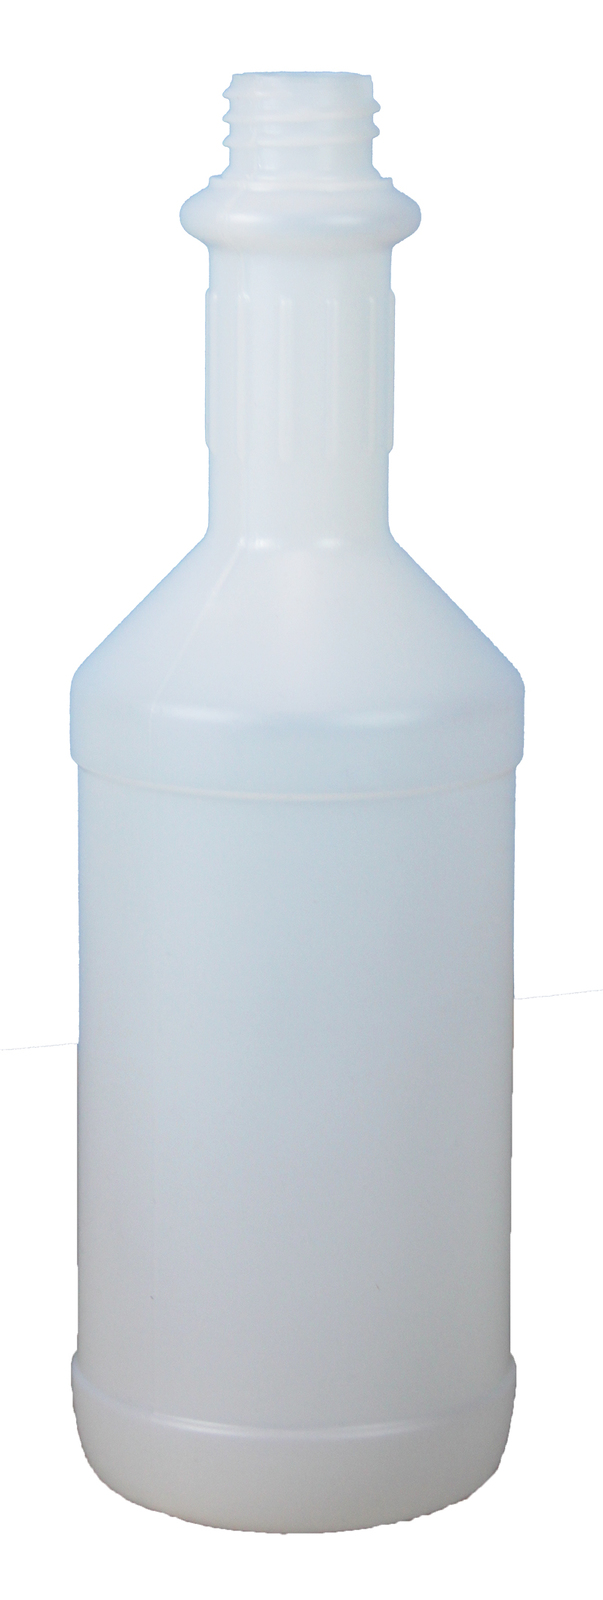 Solo Pak 750ml Spray Bottle Only - Trigger Not Included